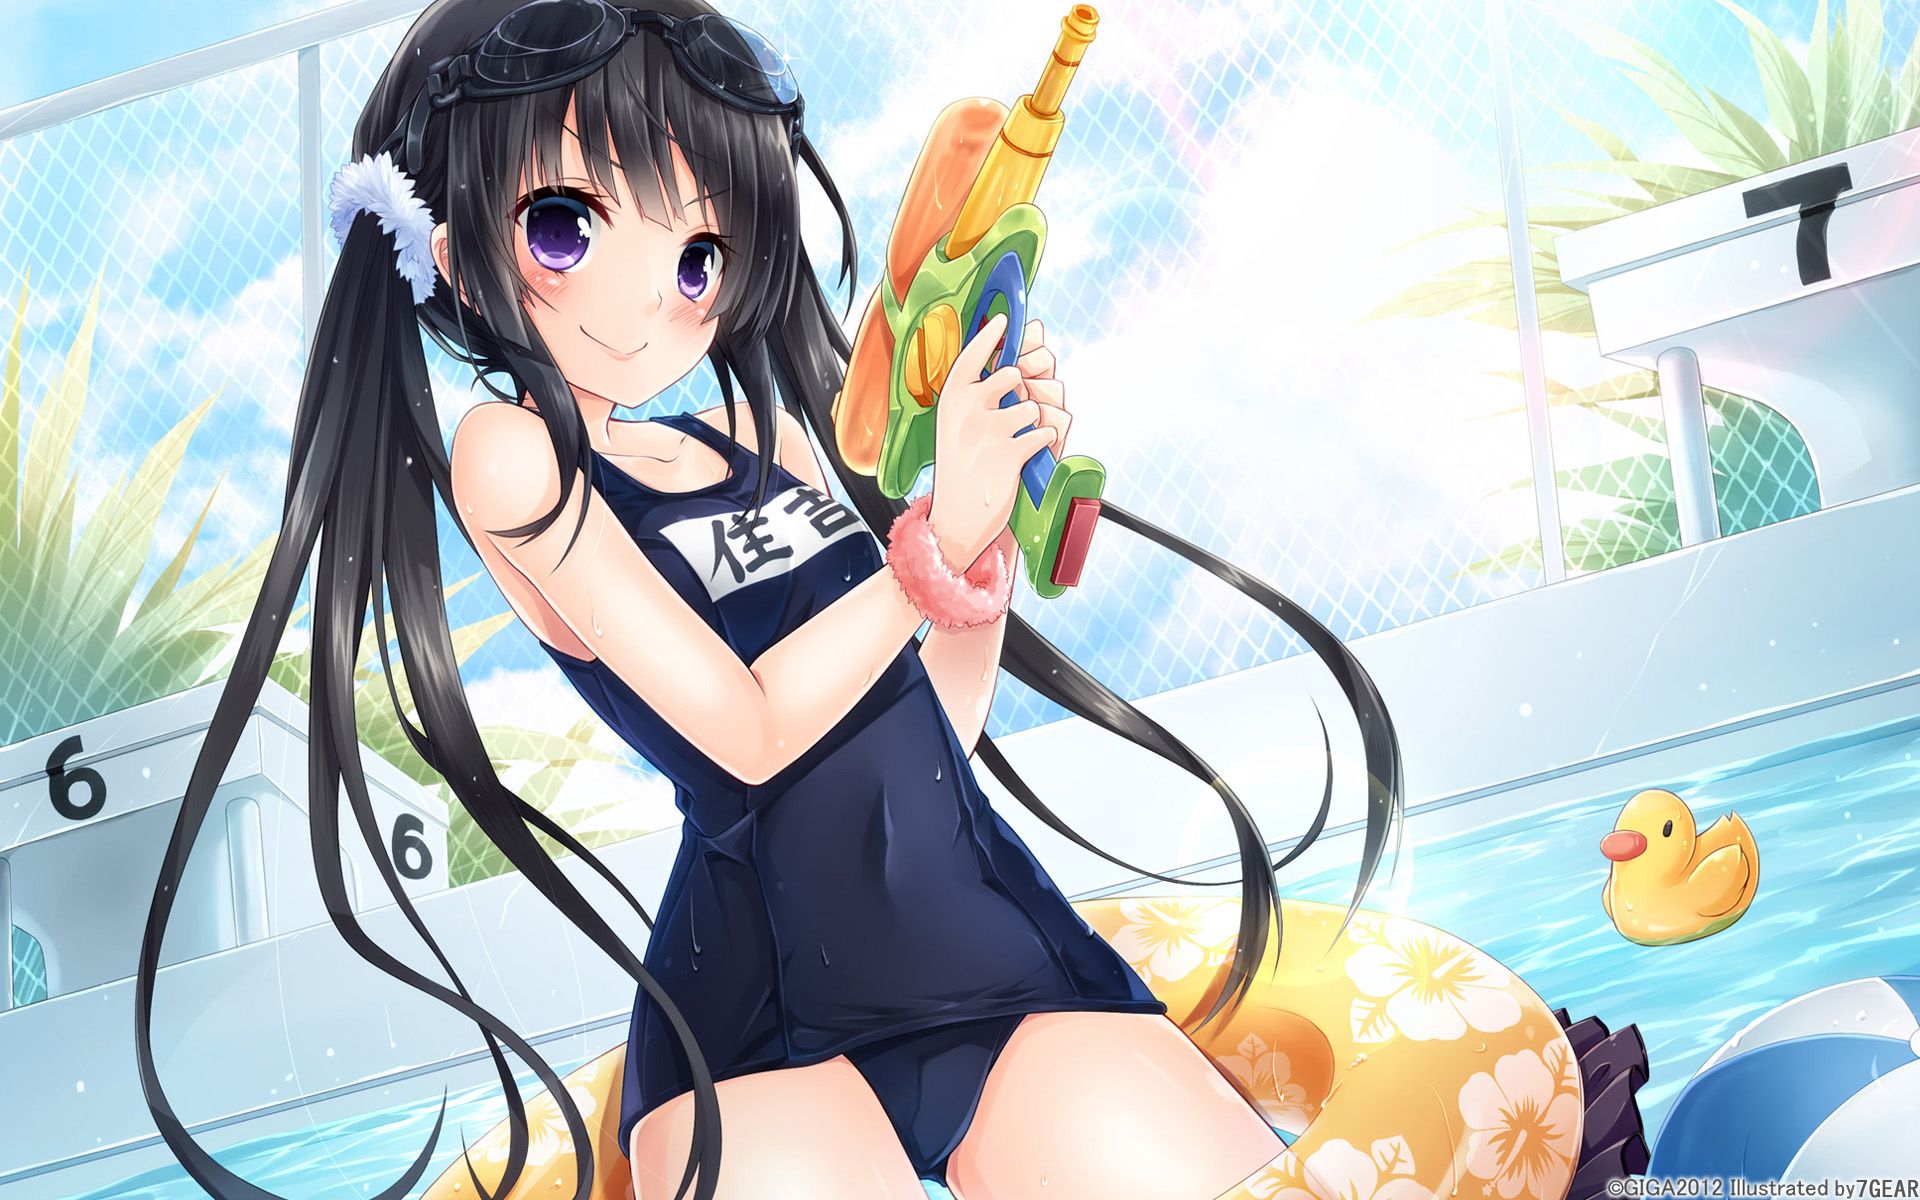 The season of the two-dimensional swimsuit is Kita! Put-44 who want to heal the withdrawal symptoms of the swimsuit addiction 35